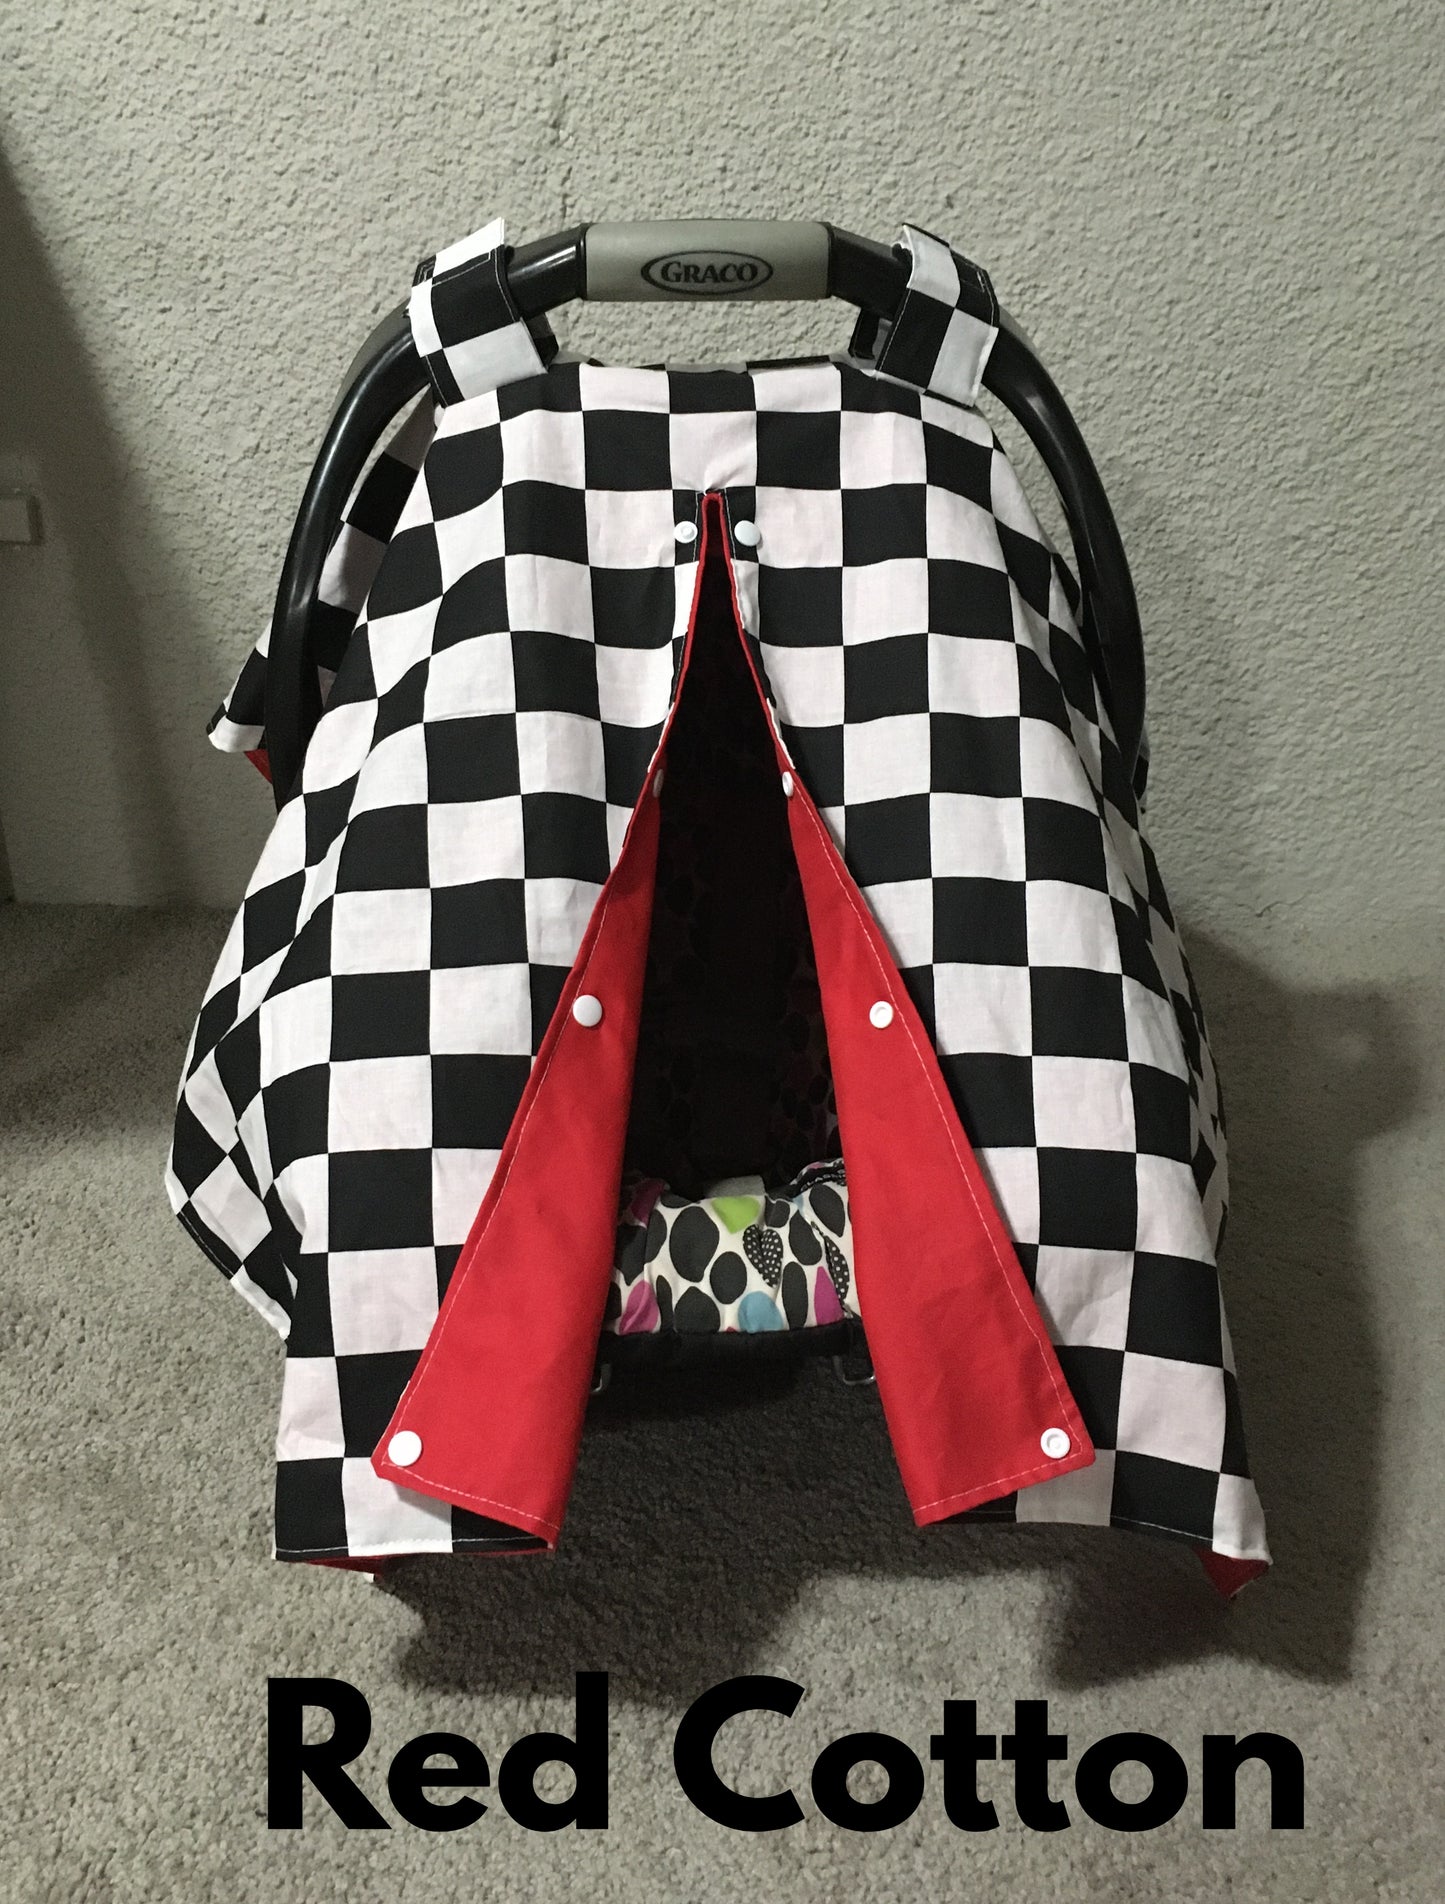 racing check canopy/car seat cover shown in red cotton in the open option